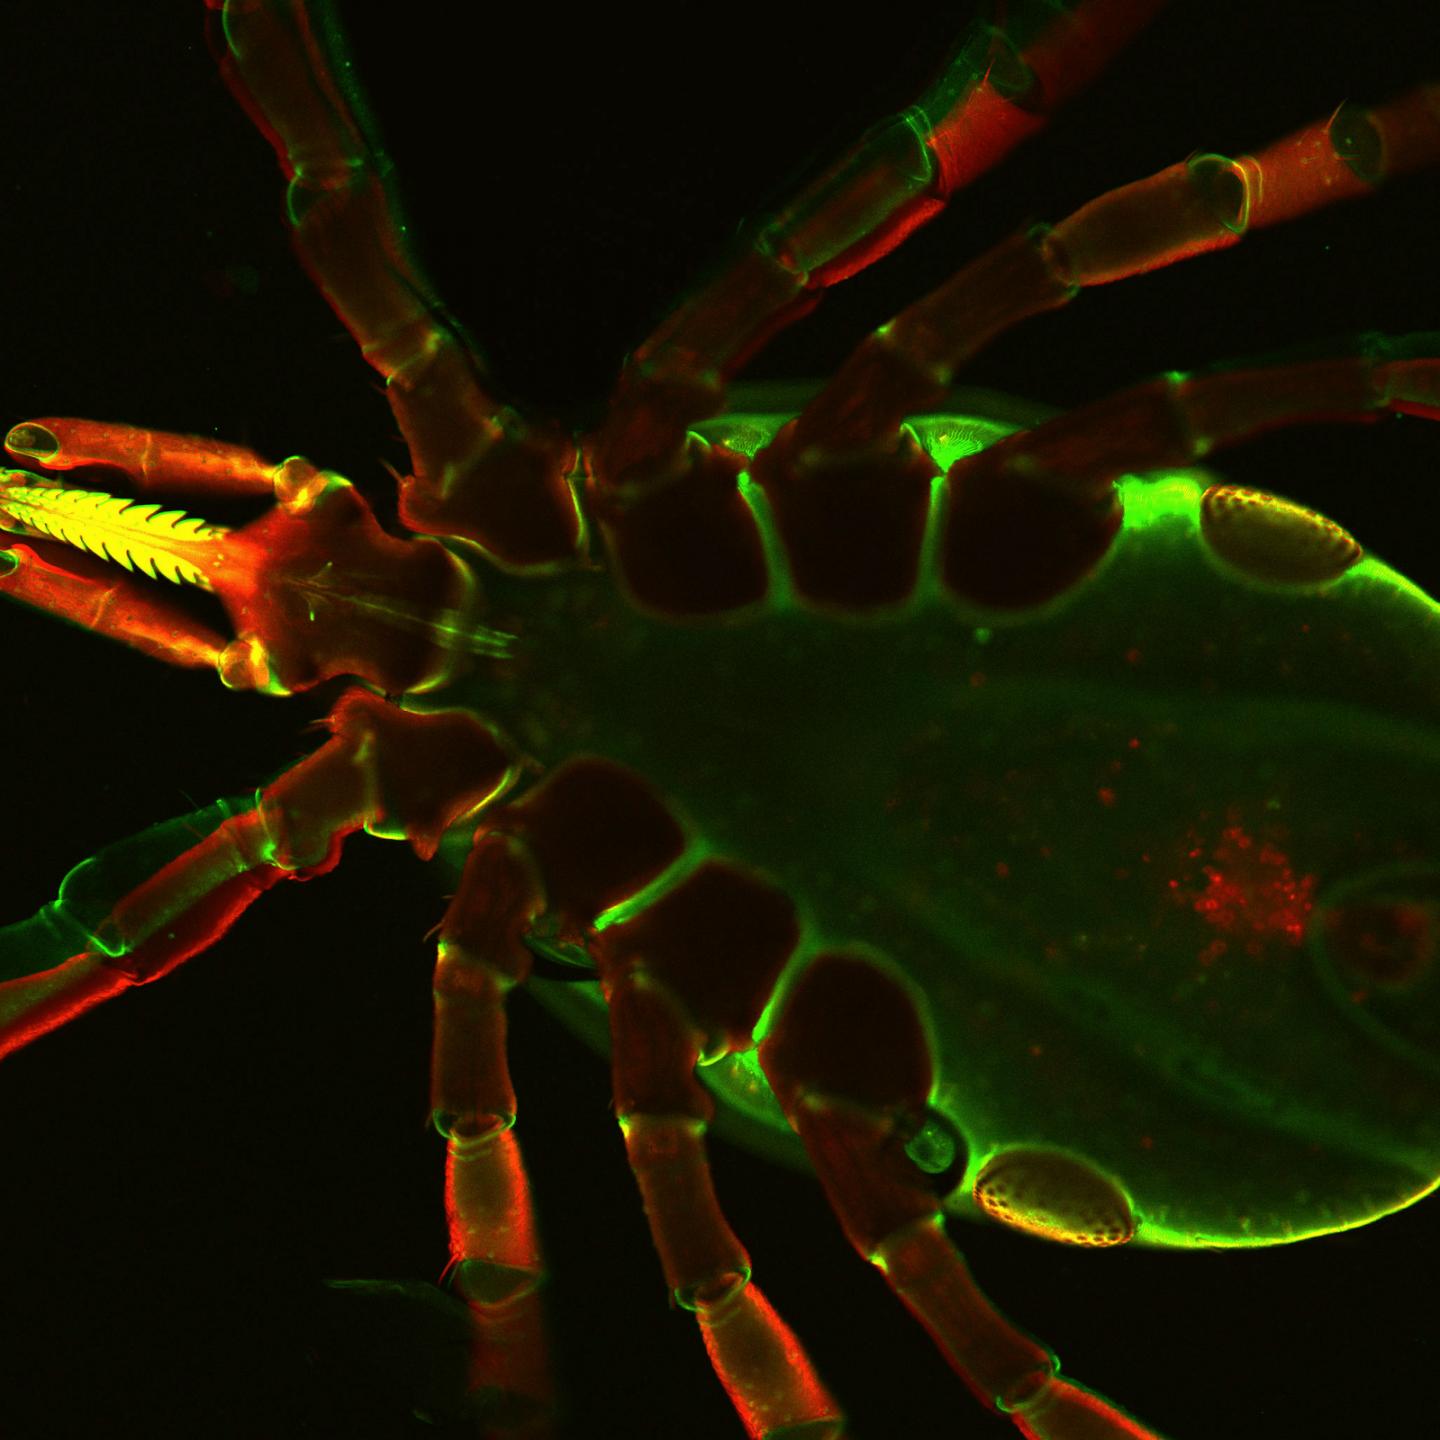 <i>Ixodes scapularis</i> ticks transmit the pathogens of Lyme disease, resulting in a multisystem illness in a variety of animals and humans. The image shows the bottom side of a live <i>Ixodes</i> tick as seen under a confocal immunofluorescence microscope. [Utpal Pal/University of Maryland]” /><br />
<span class=